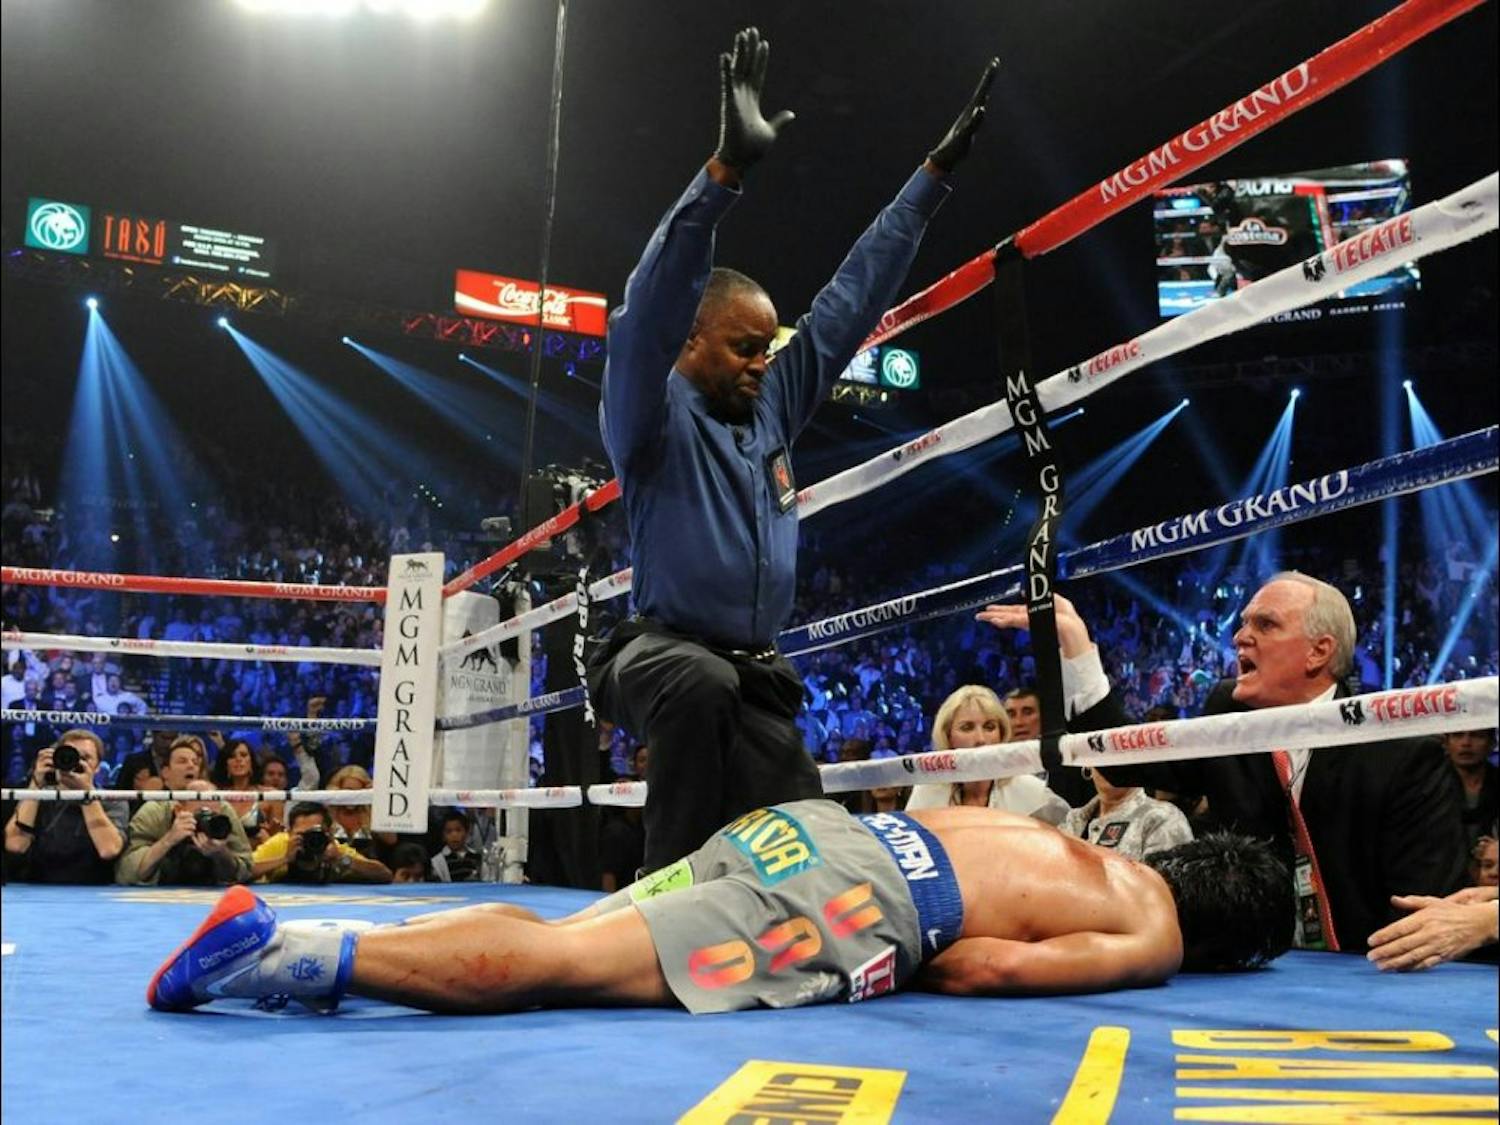 	Manny “Pacman” Pacquiao sprawled out on the canvas following a devastating right hand blow from Juan Manuel Marquez on Saturday.